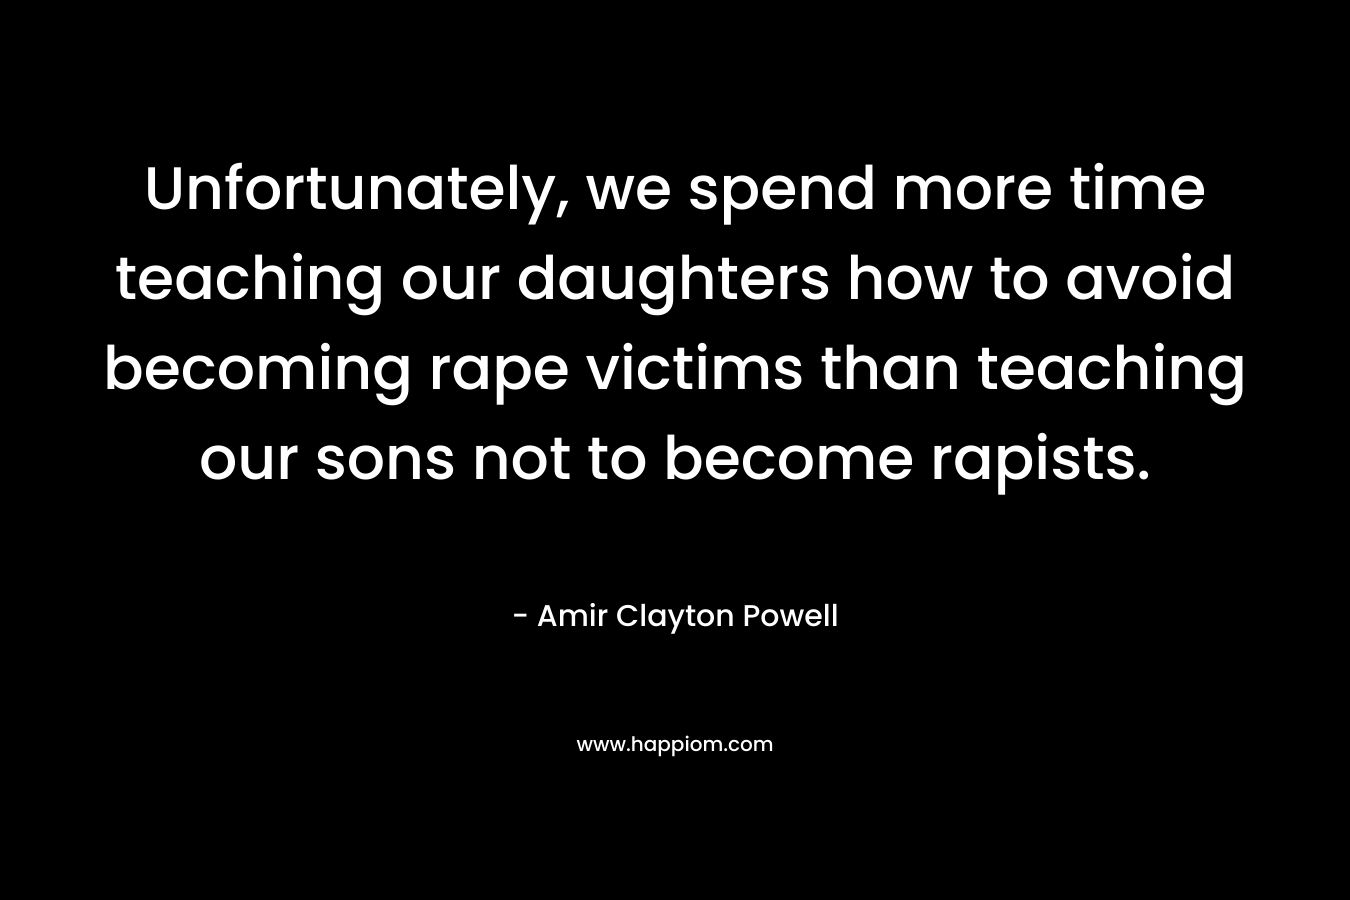 Unfortunately, we spend more time teaching our daughters how to avoid becoming rape victims than teaching our sons not to become rapists.